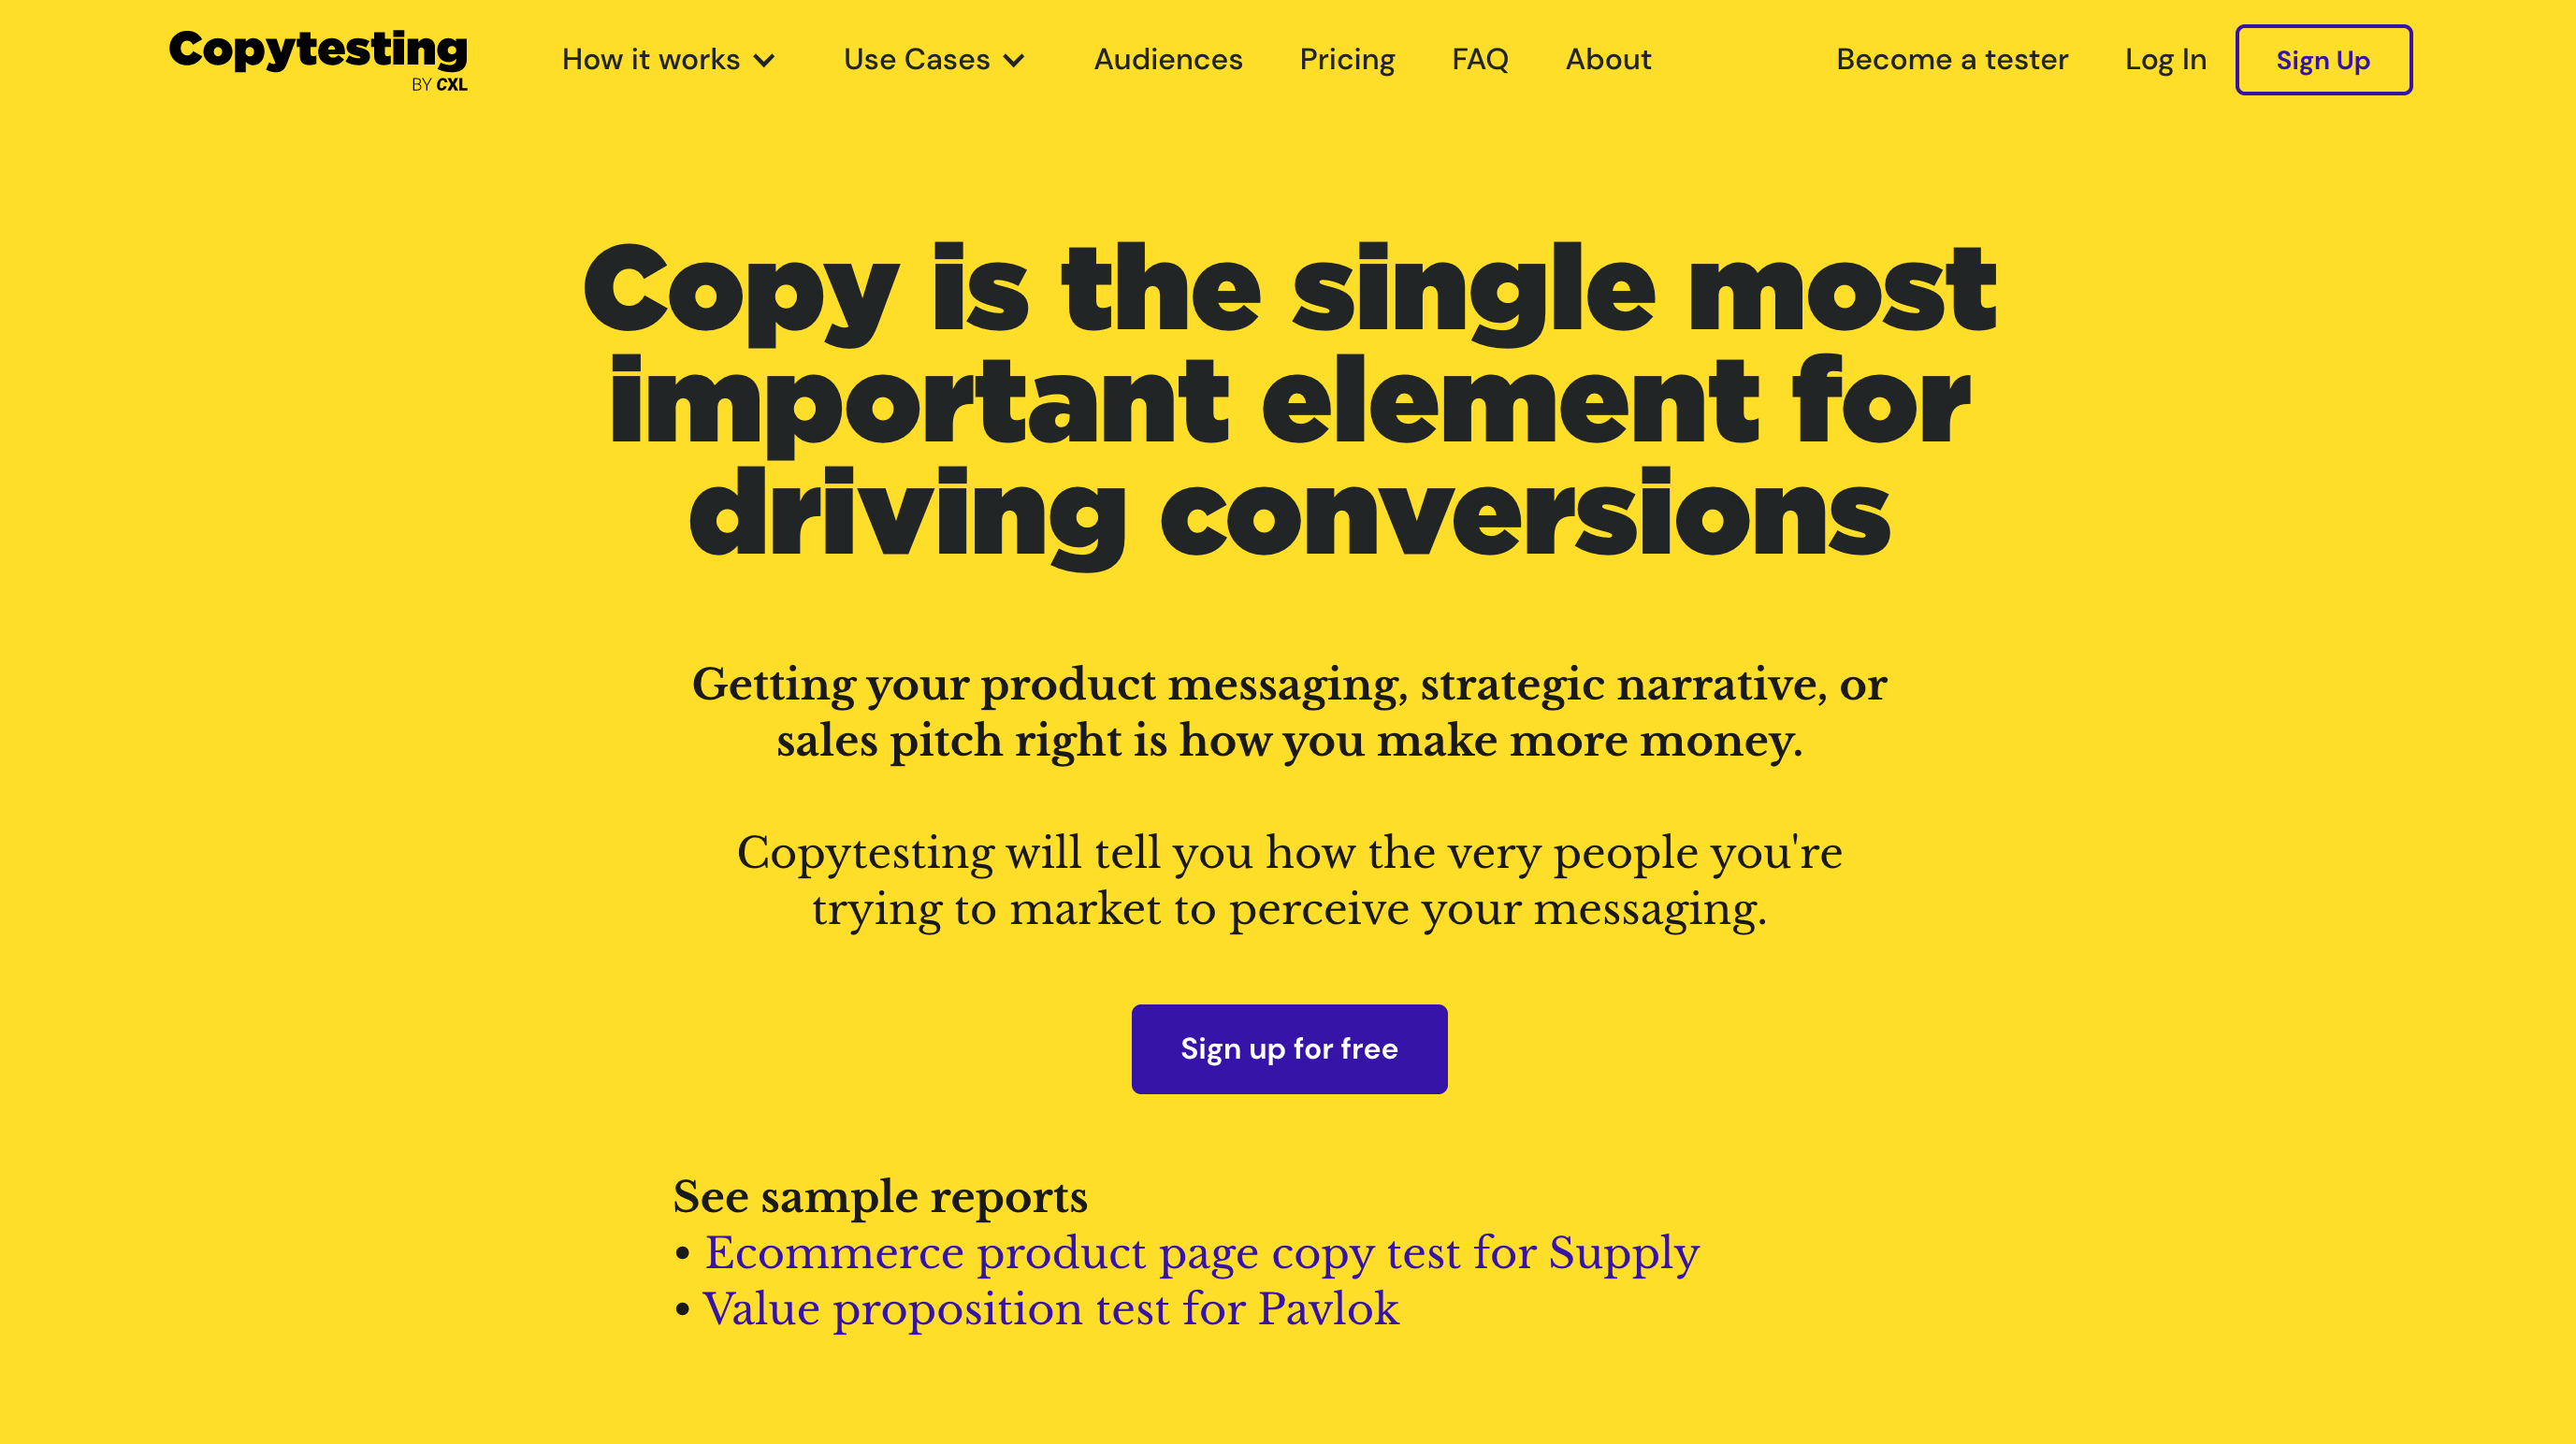 Copytesting is a new tool from CXL that allows you to test different messaging and get feedback. 